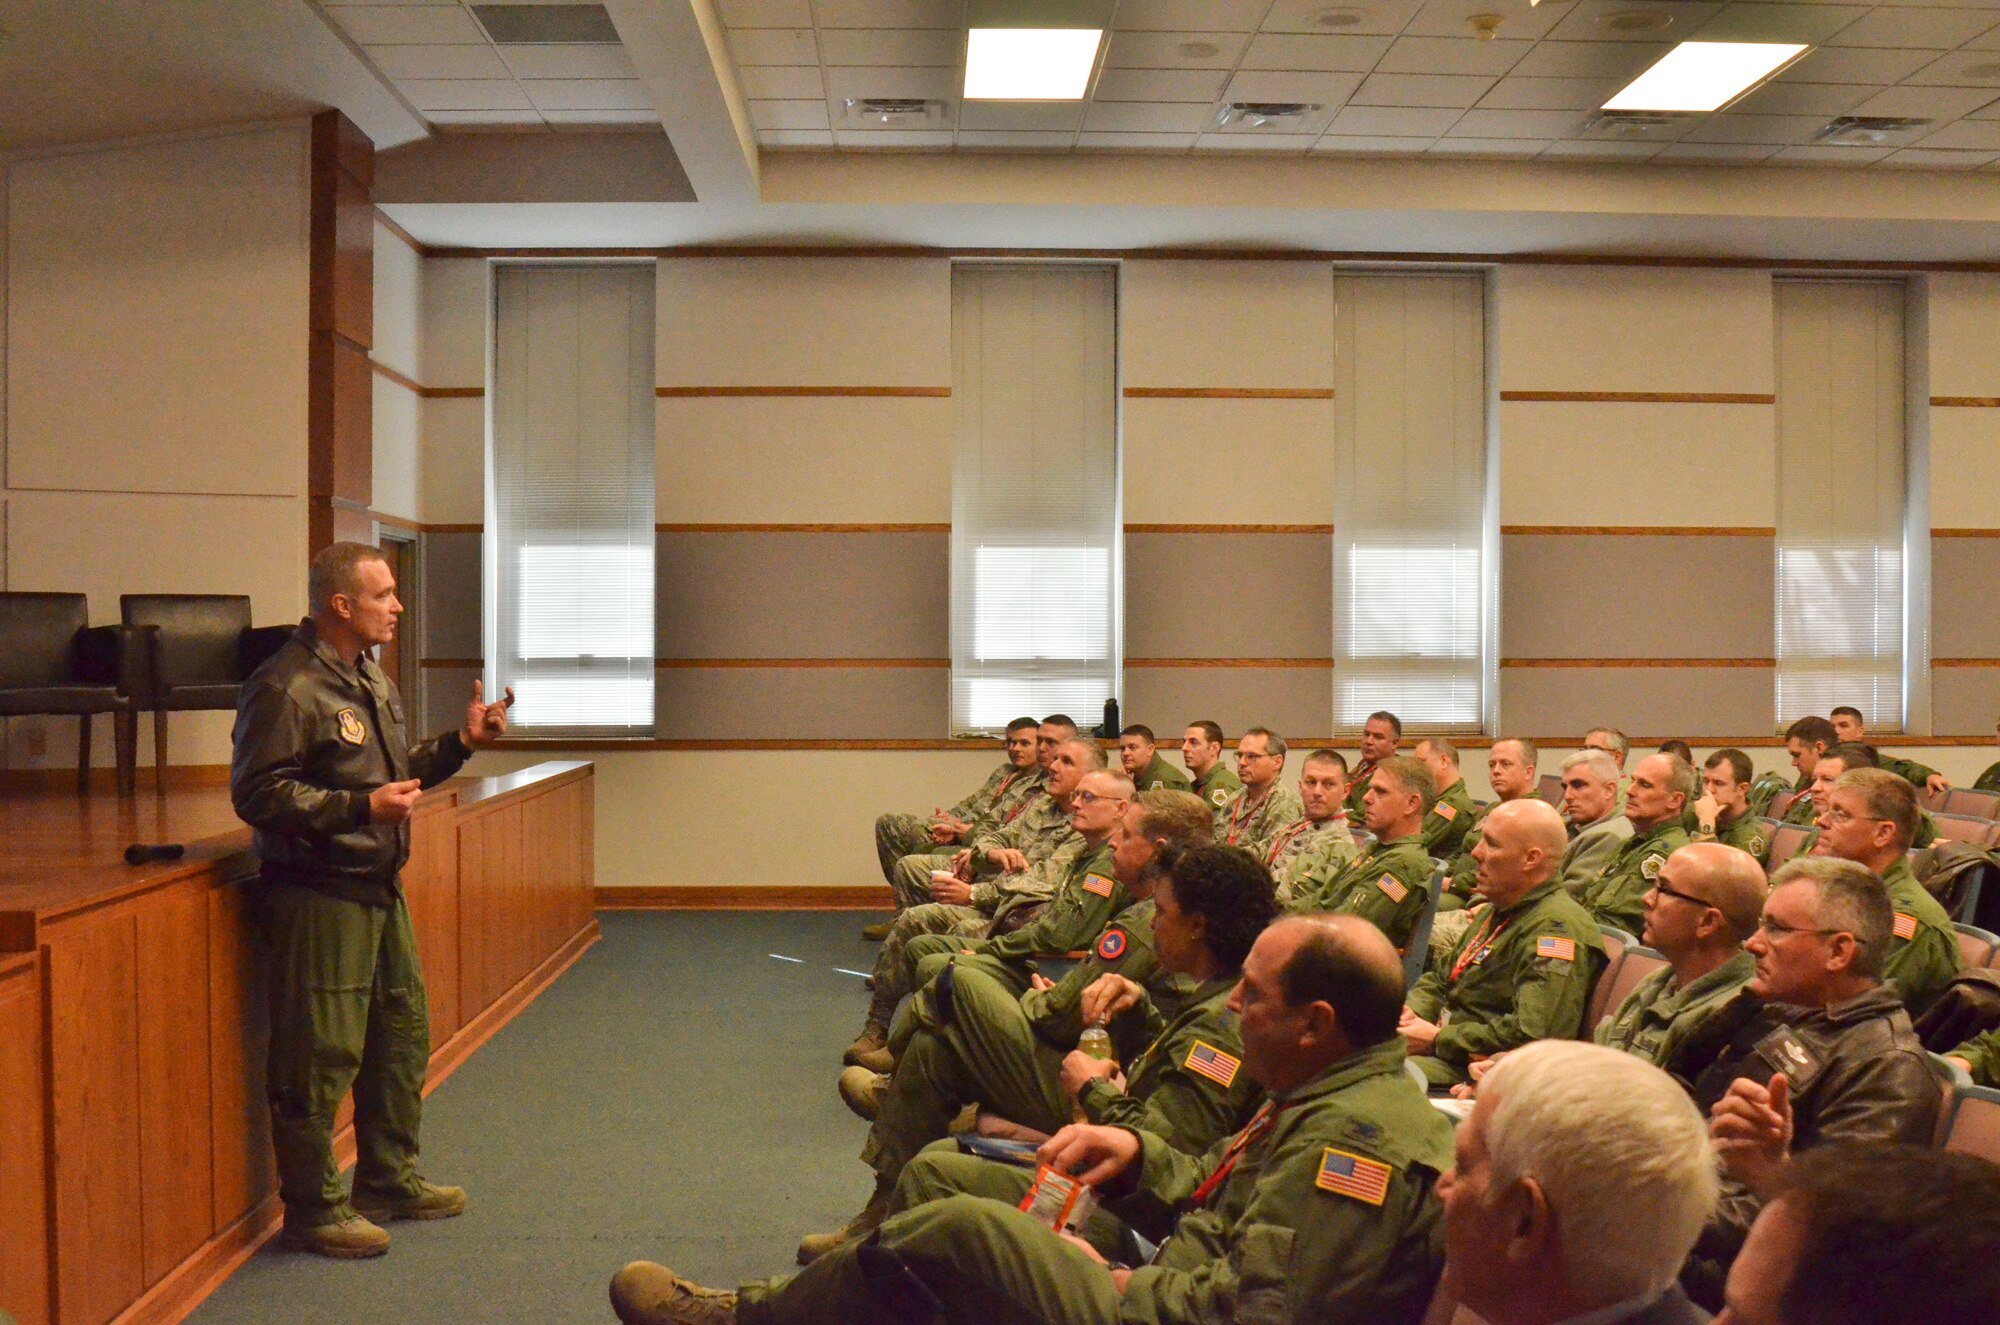 U.S. Air Force Col. Bobby Oates, commander of the Advanced Airlift Tactics Training Center, speaks to guests at the center’s 34th annual symposium at Rosecrans Air National Guard Base, St. Joseph, Mo., Jan. 28, 2015. Over 300 Airmen who specialize in airlift tactics from the regular Air Force, Air Force Reserves, and Air National Guard attended the symposium. (U.S. Air National Guard photo by Tech. Sgt. Erin Hickok/Released)